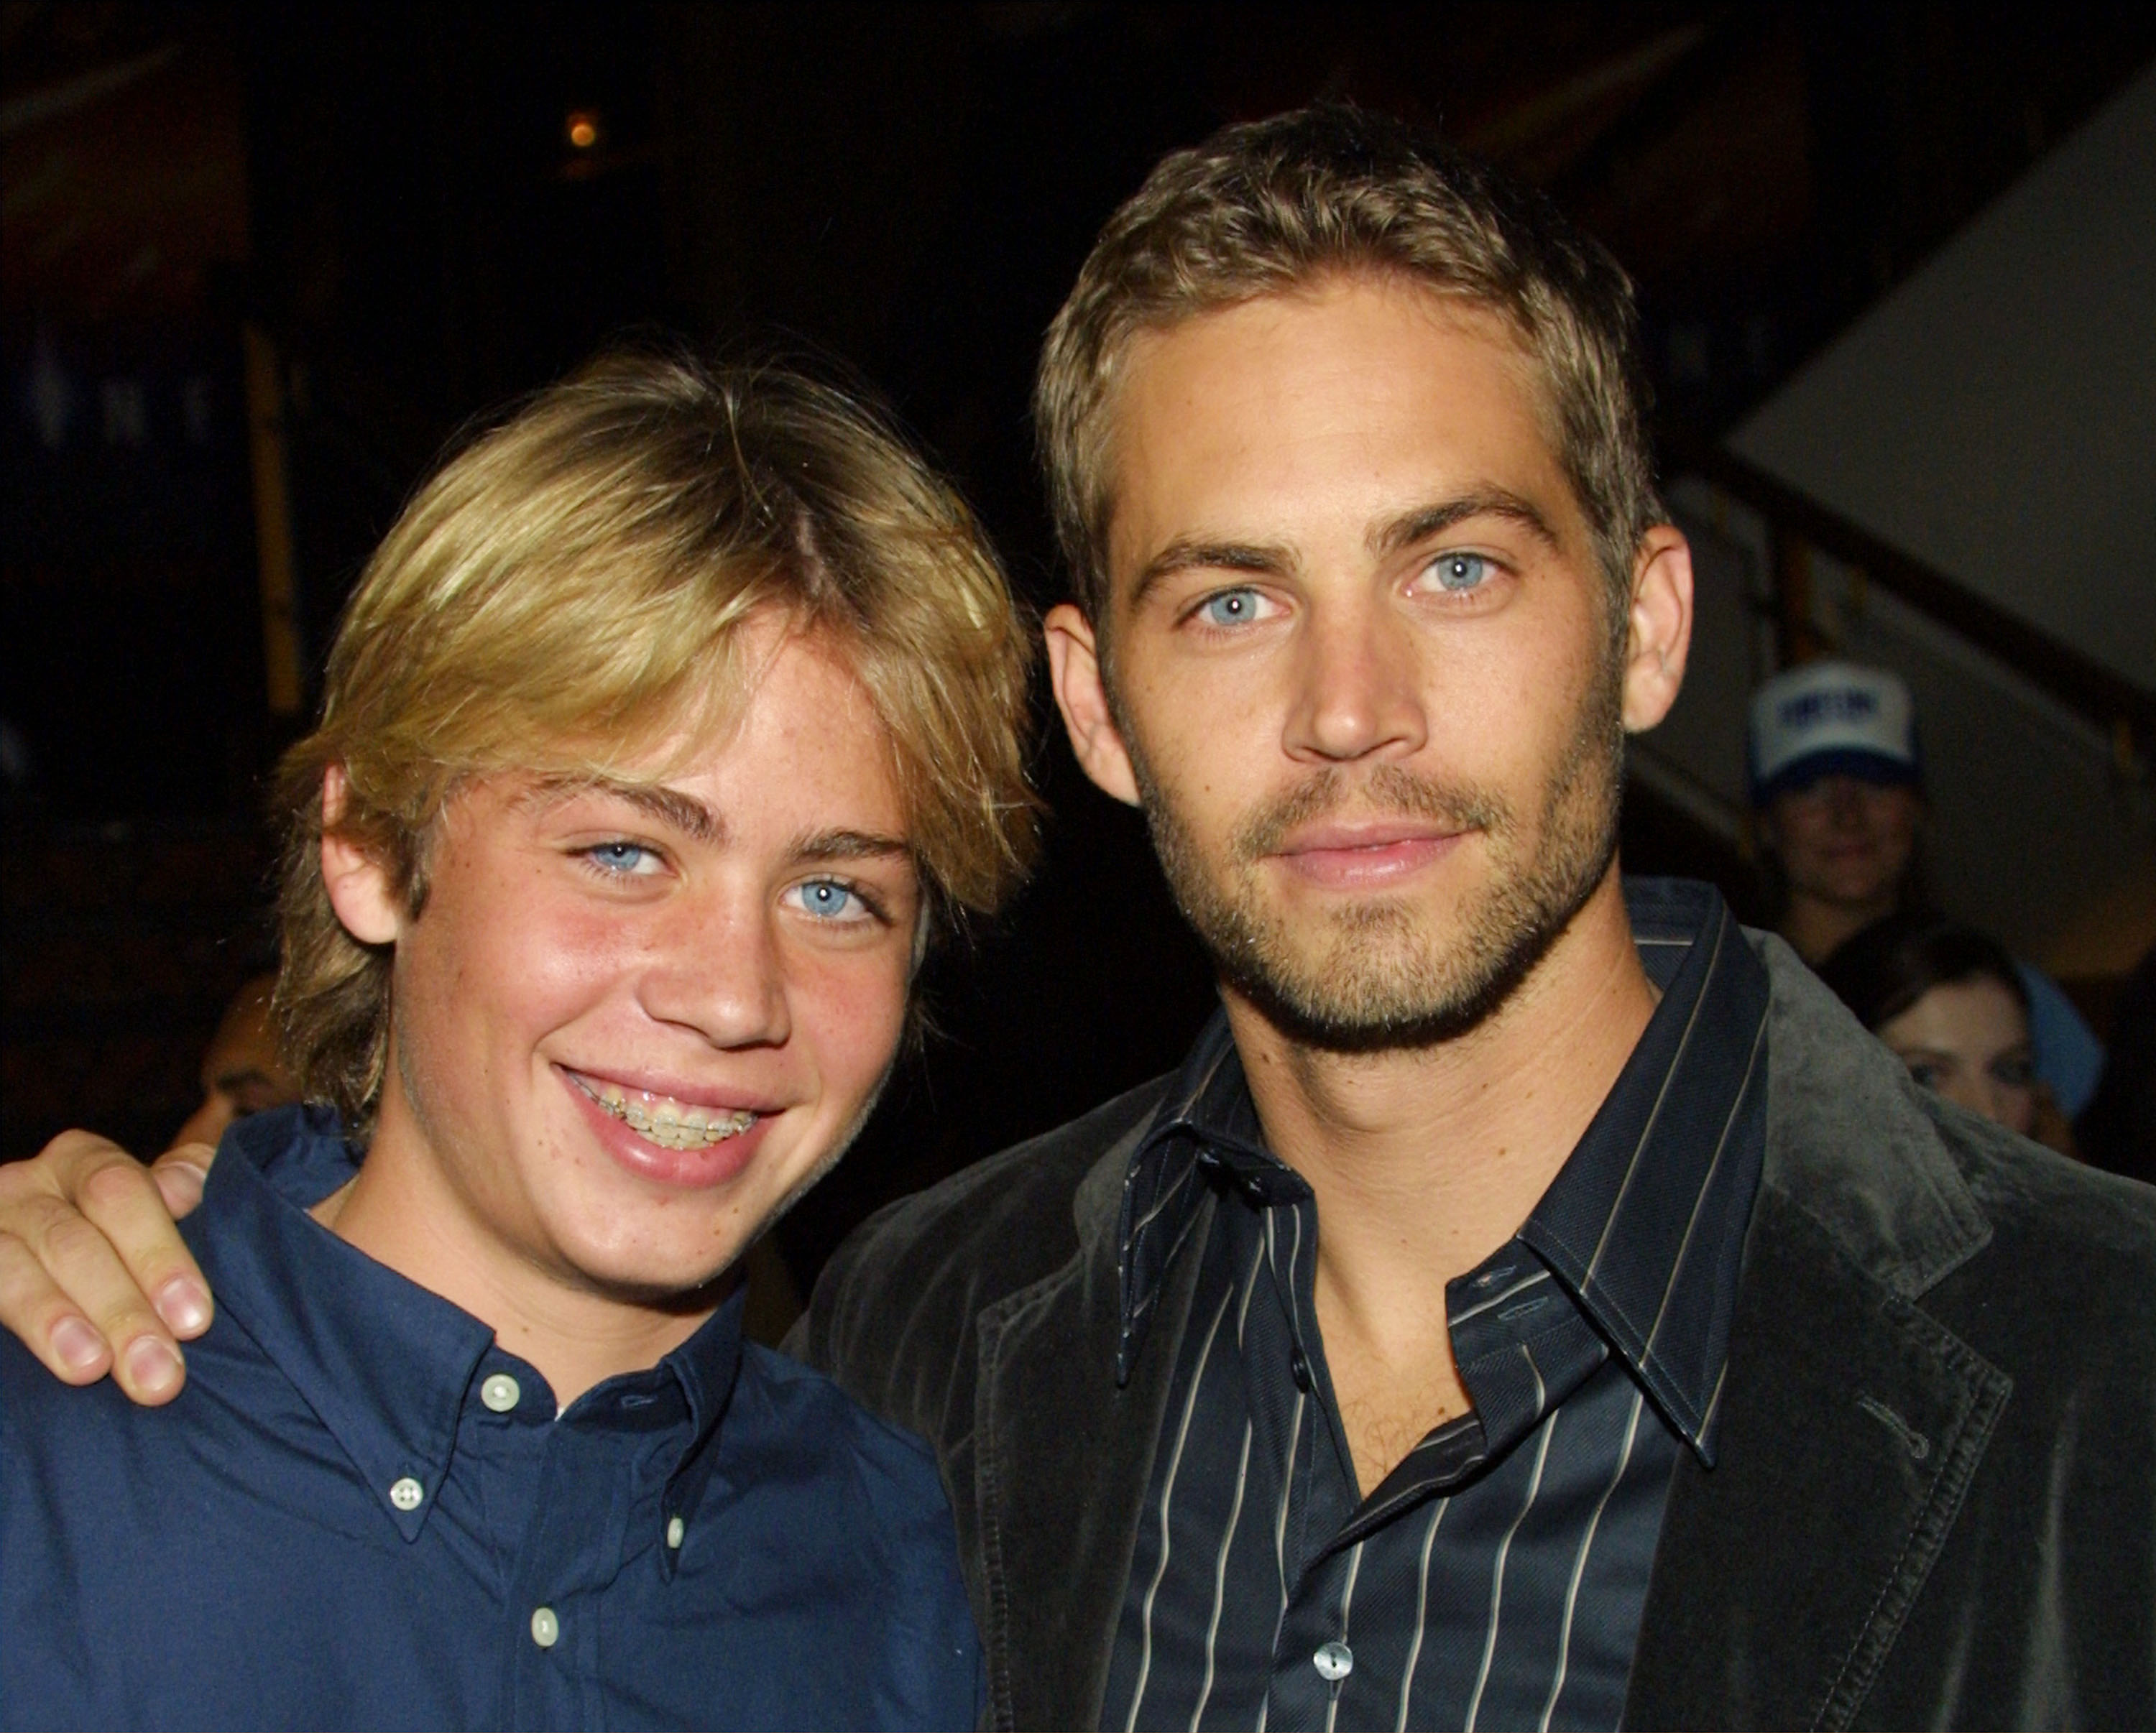 Cody Walker with his brother actor Paul Walker pose during the film premiere of "Timeline" at the Mann's National Theatre on November 19, 2003 in Westwood, California. | Source: Getty Images